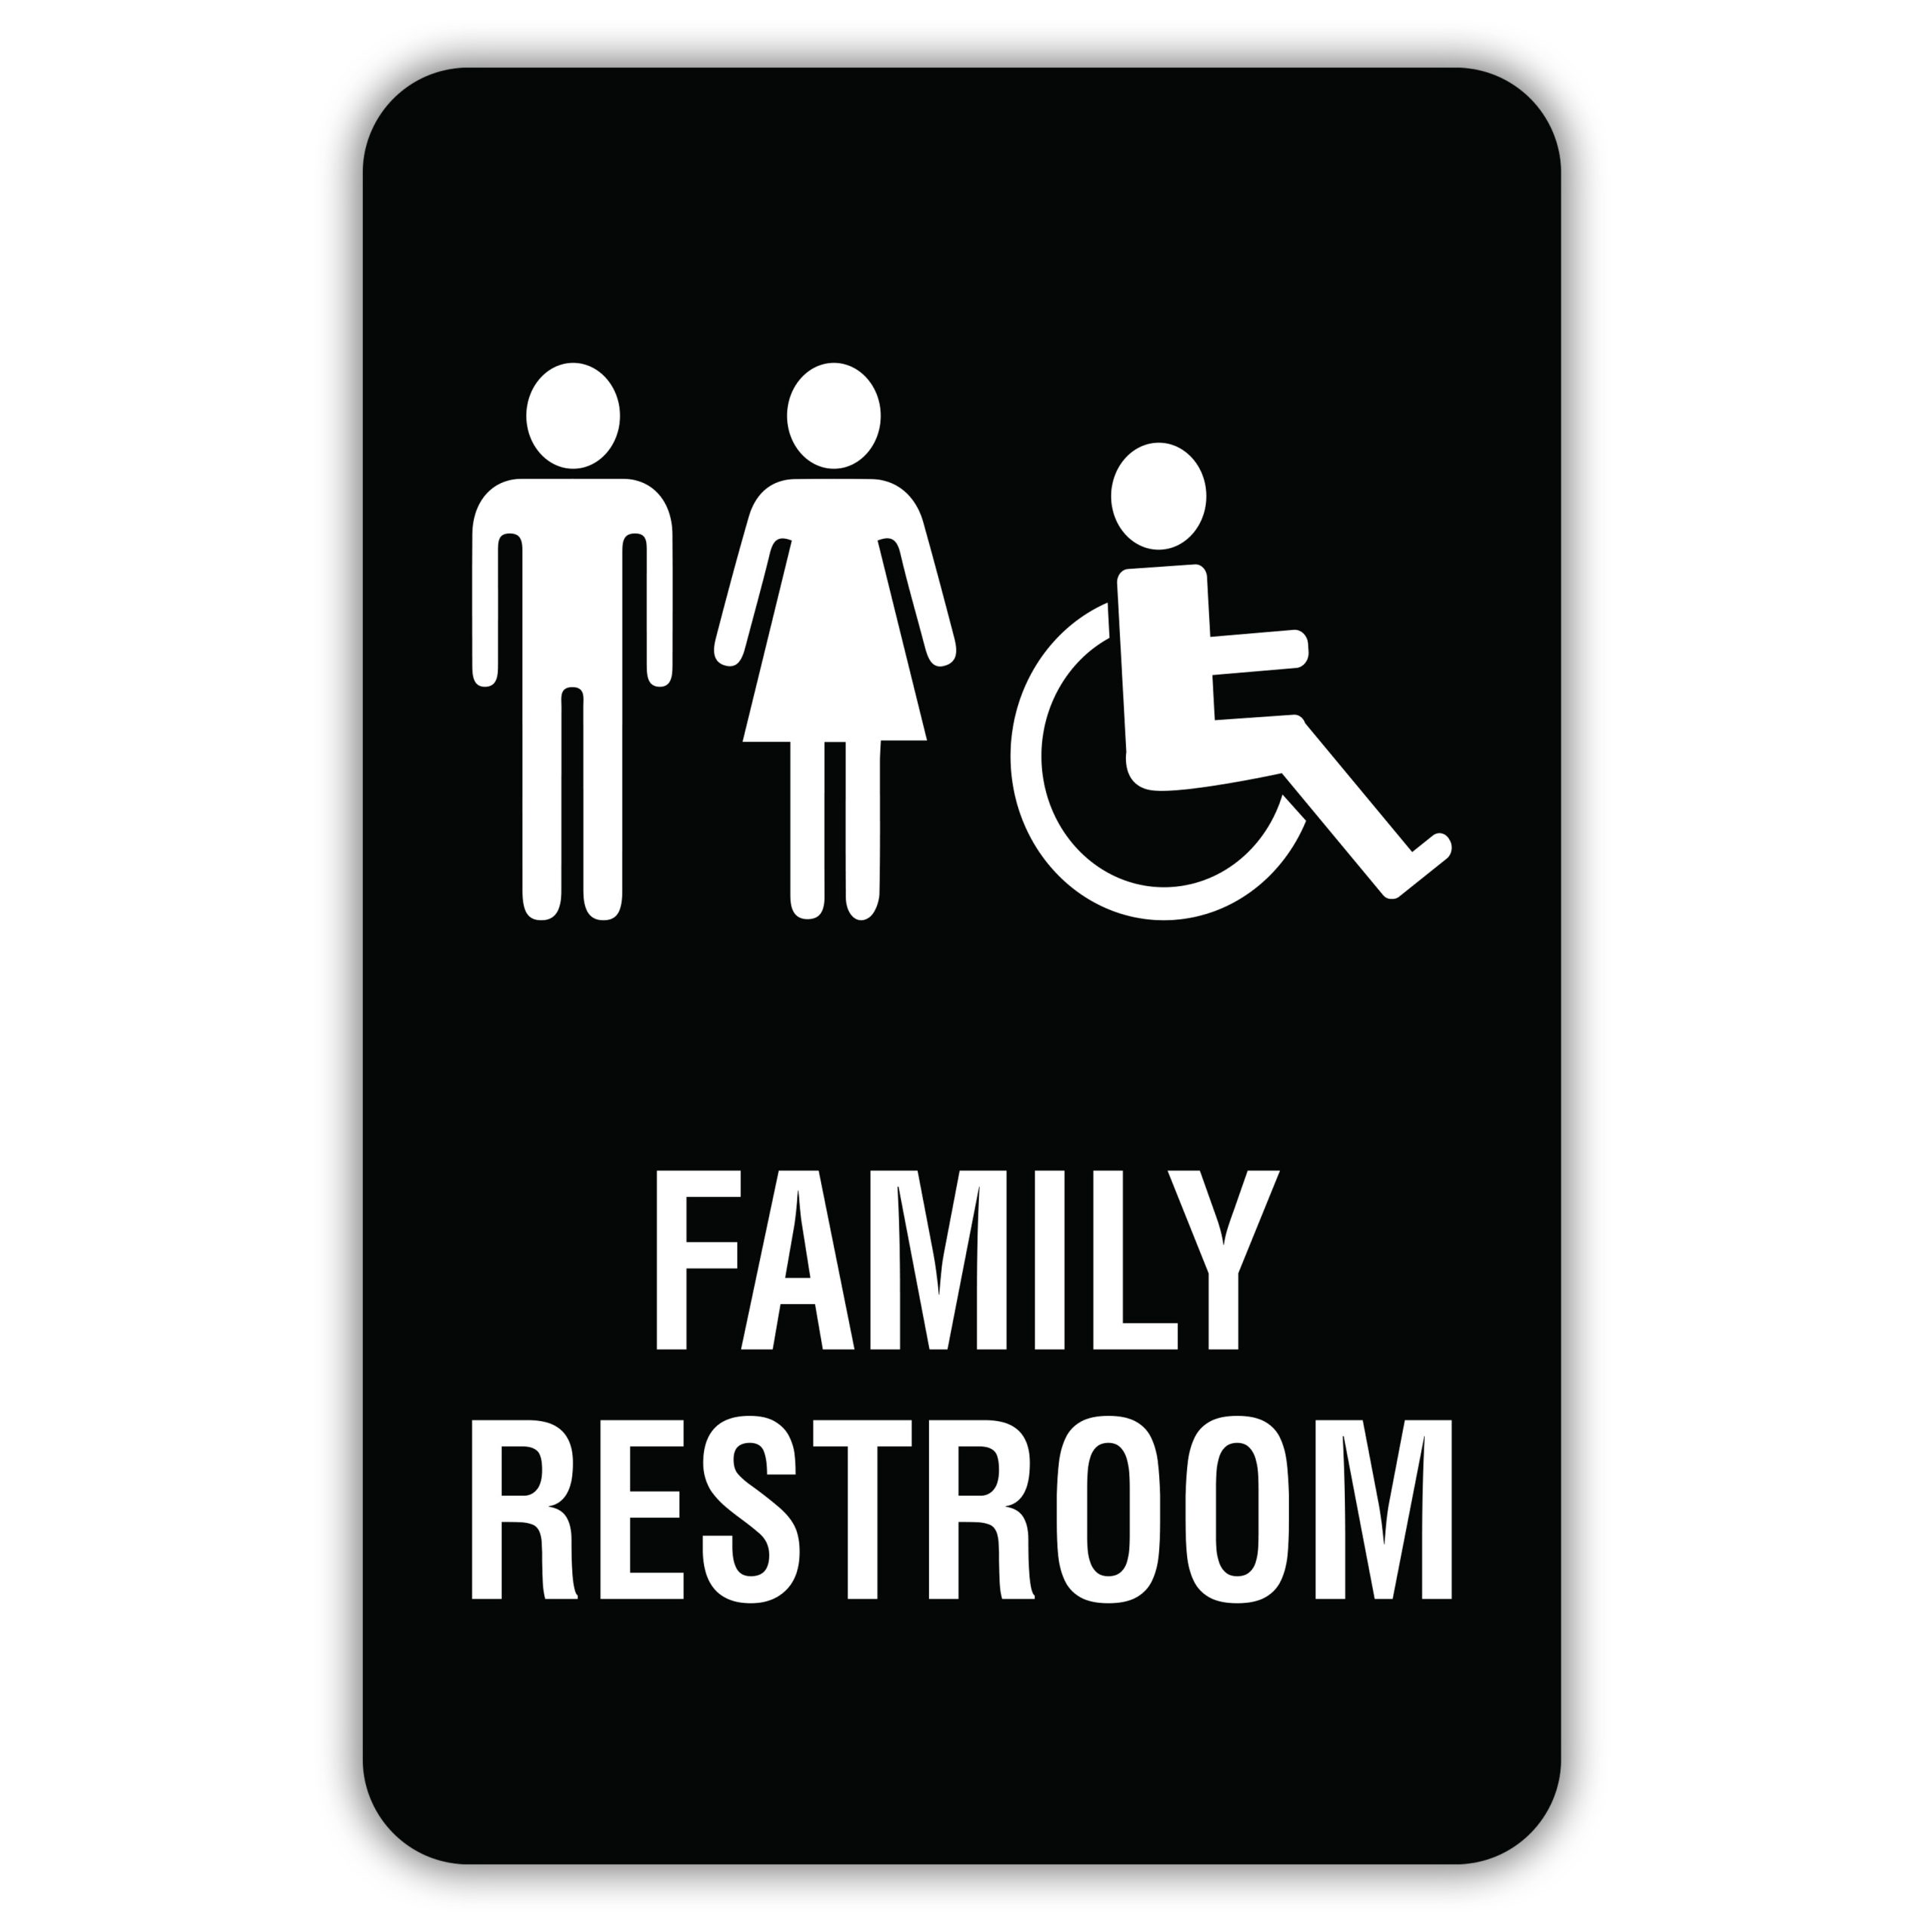 FAMILY RESTROOM - American Sign Company